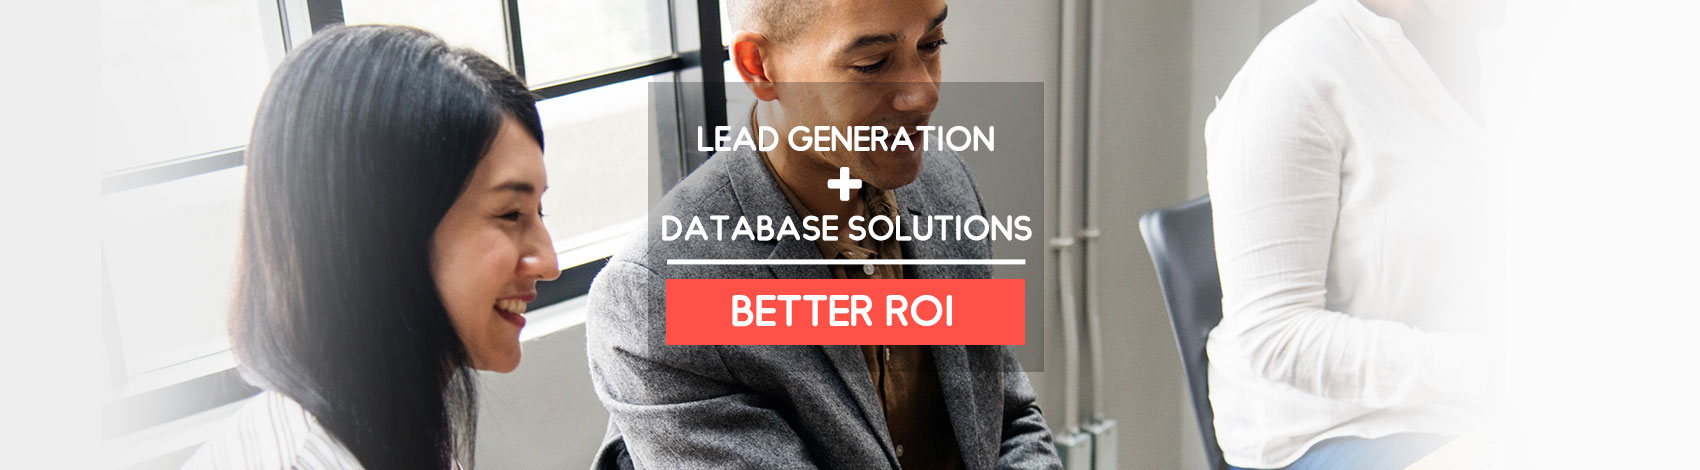 Lead Generation + Database Solutions = Better ROI